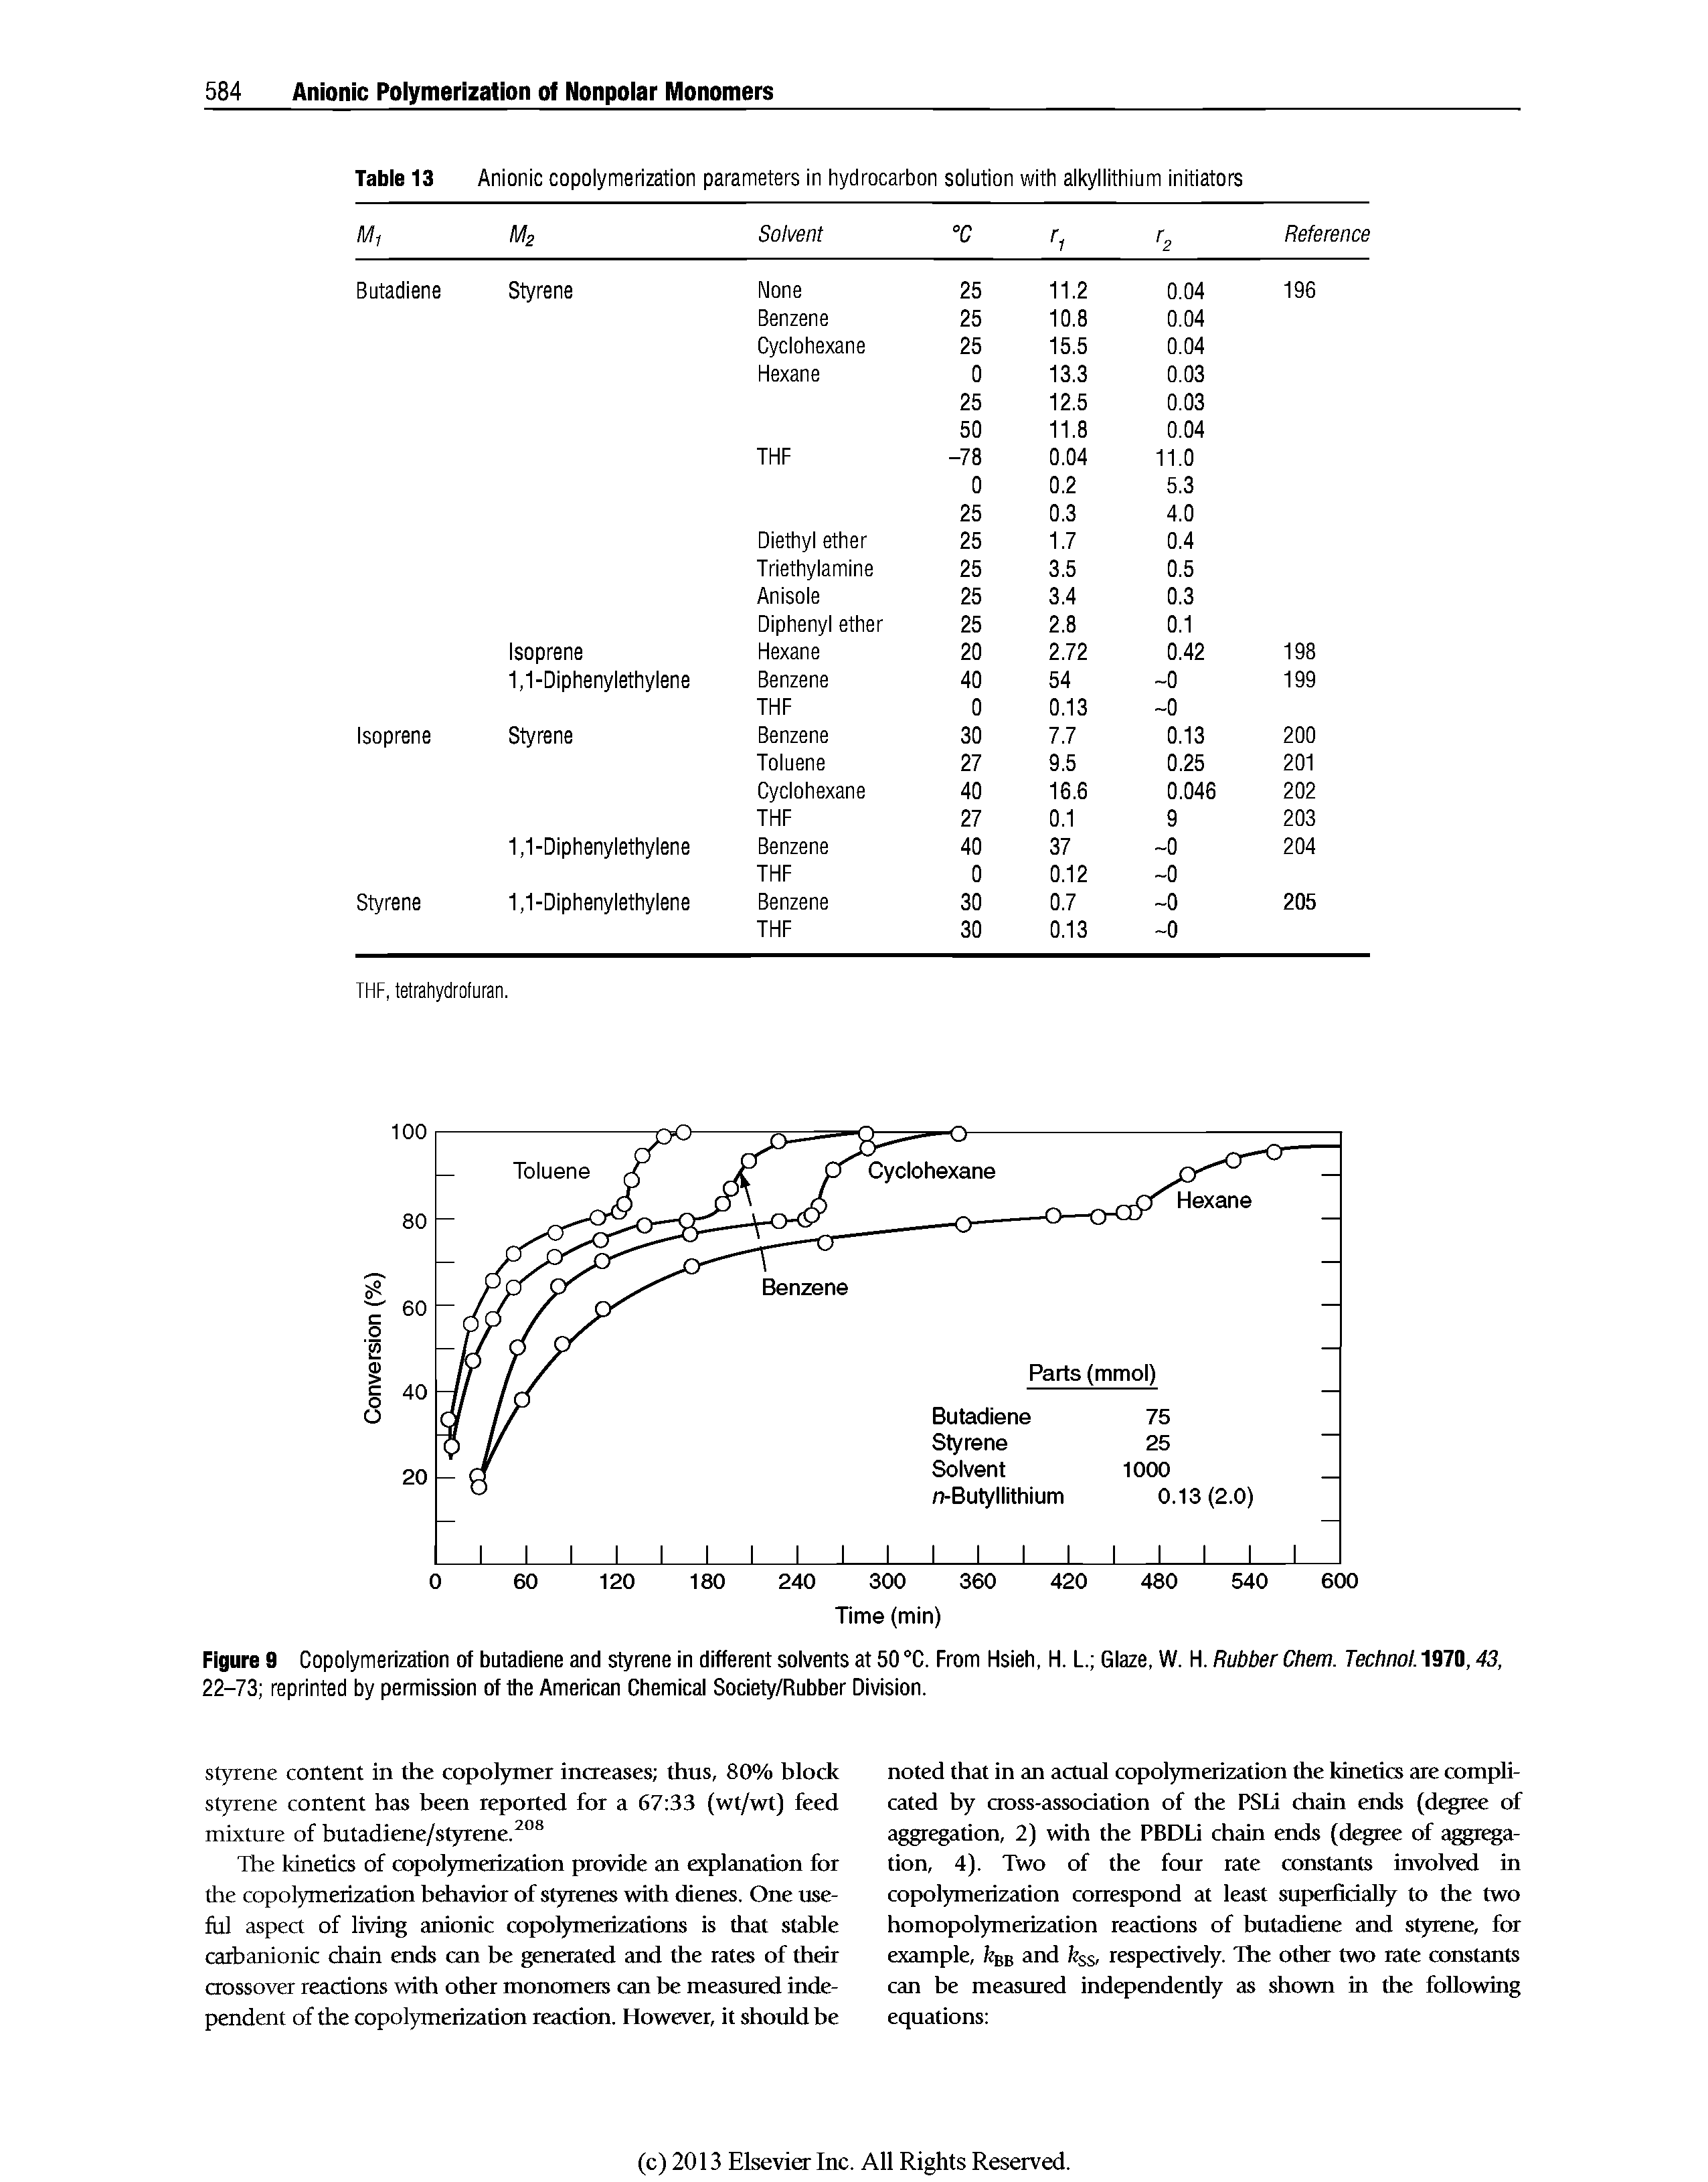 Figure 9 Copolymerization of butadiene and styrene in different solvents at 50 °C. From Hsieh, H. L. Glaze, W. H. Rubber Chem. Technol. 1970,43, 22-73 reprinted by permission of the American Chemical Society/Rubber Division.